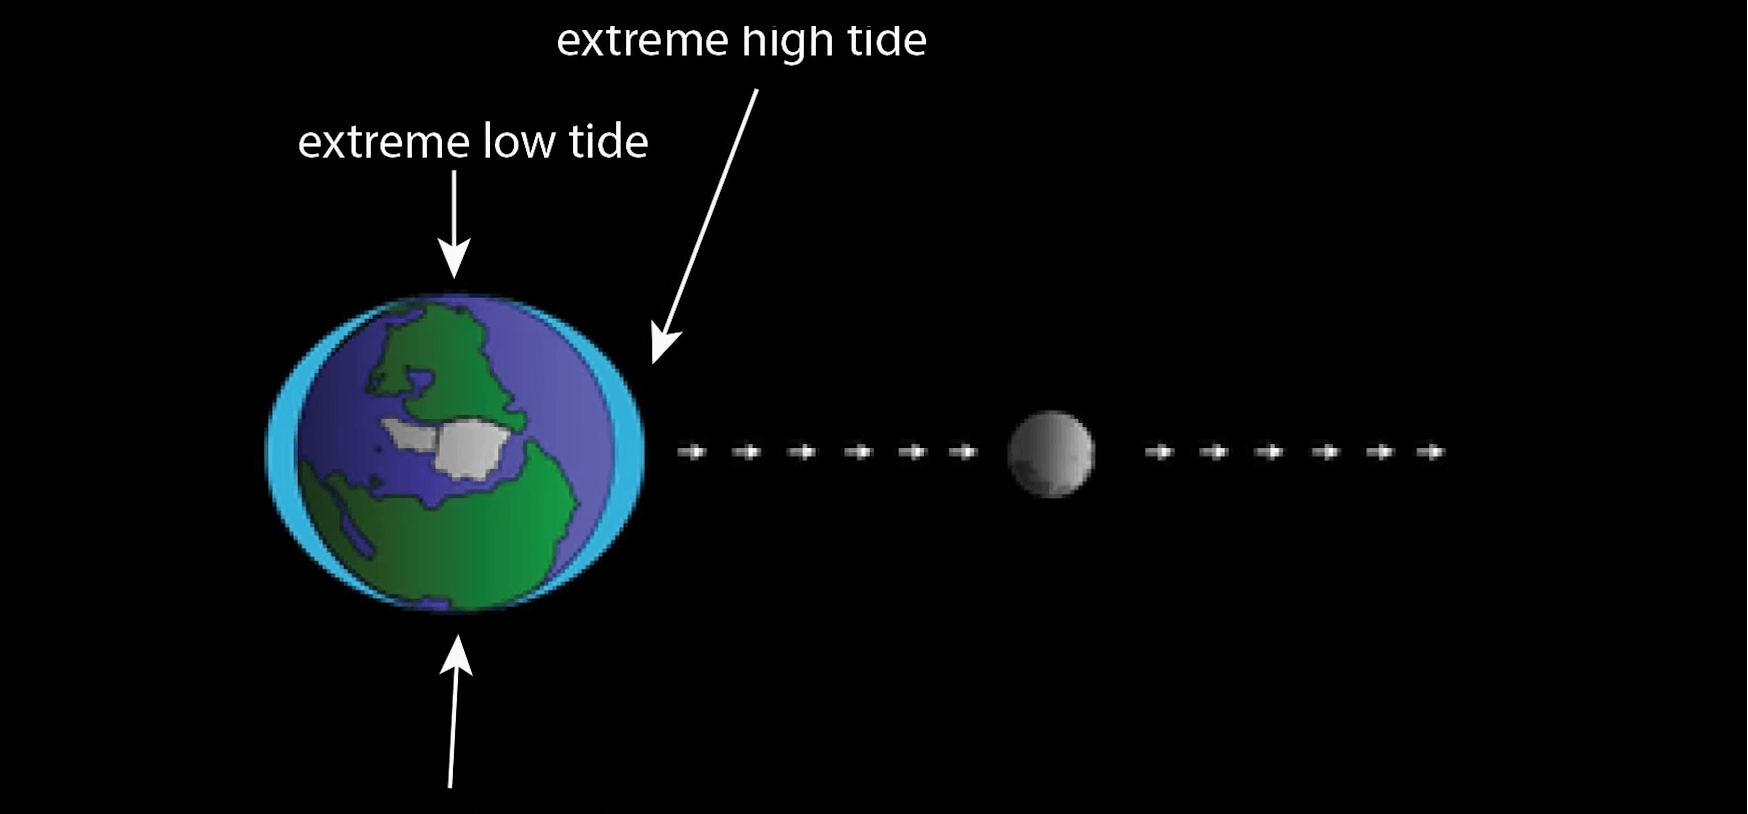 Tides as caused due to moon